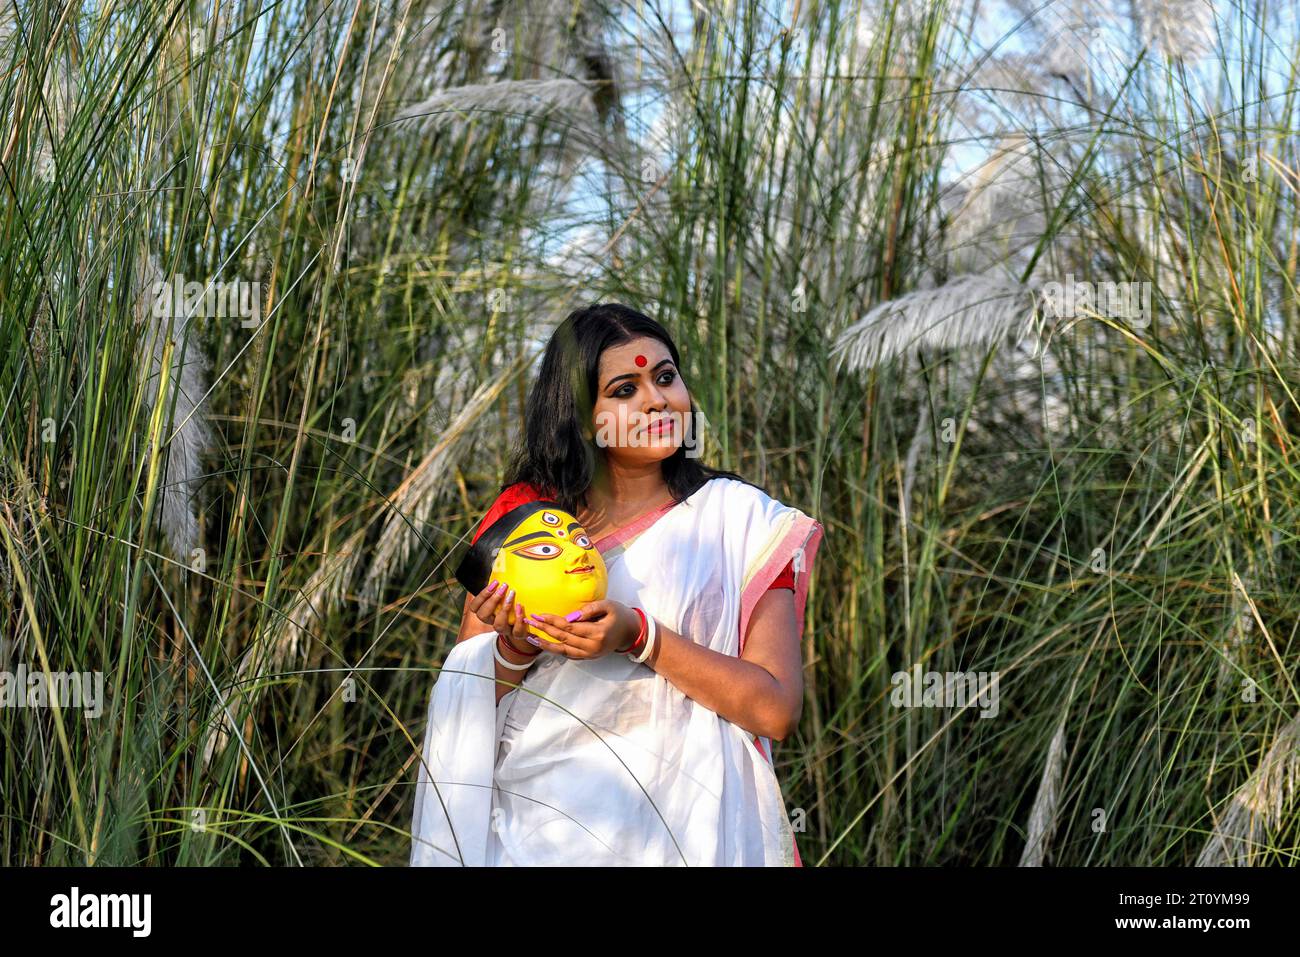 Fashion model, Rima Bhattacharya poses while wearing a traditional Indian saree and holding a Clay face of Durga idol during the Agomoni Concept outdoor Photo shoot in a Catkins or Kashful filled area around 60km from Kolkata. Fashion Model Rima Bhattacharya poses for a photo for the Photo Series based on Theme of Durga Puja vibes in India. Rima Bhattacharya, a Fashion Model and celebrity in the Bengali Fashion and television industry is collaborating with the Photo Series in promoting Durga Puja. The Photo Series is organized by a group of photographers aiming to document and promote the pre- Stock Photo